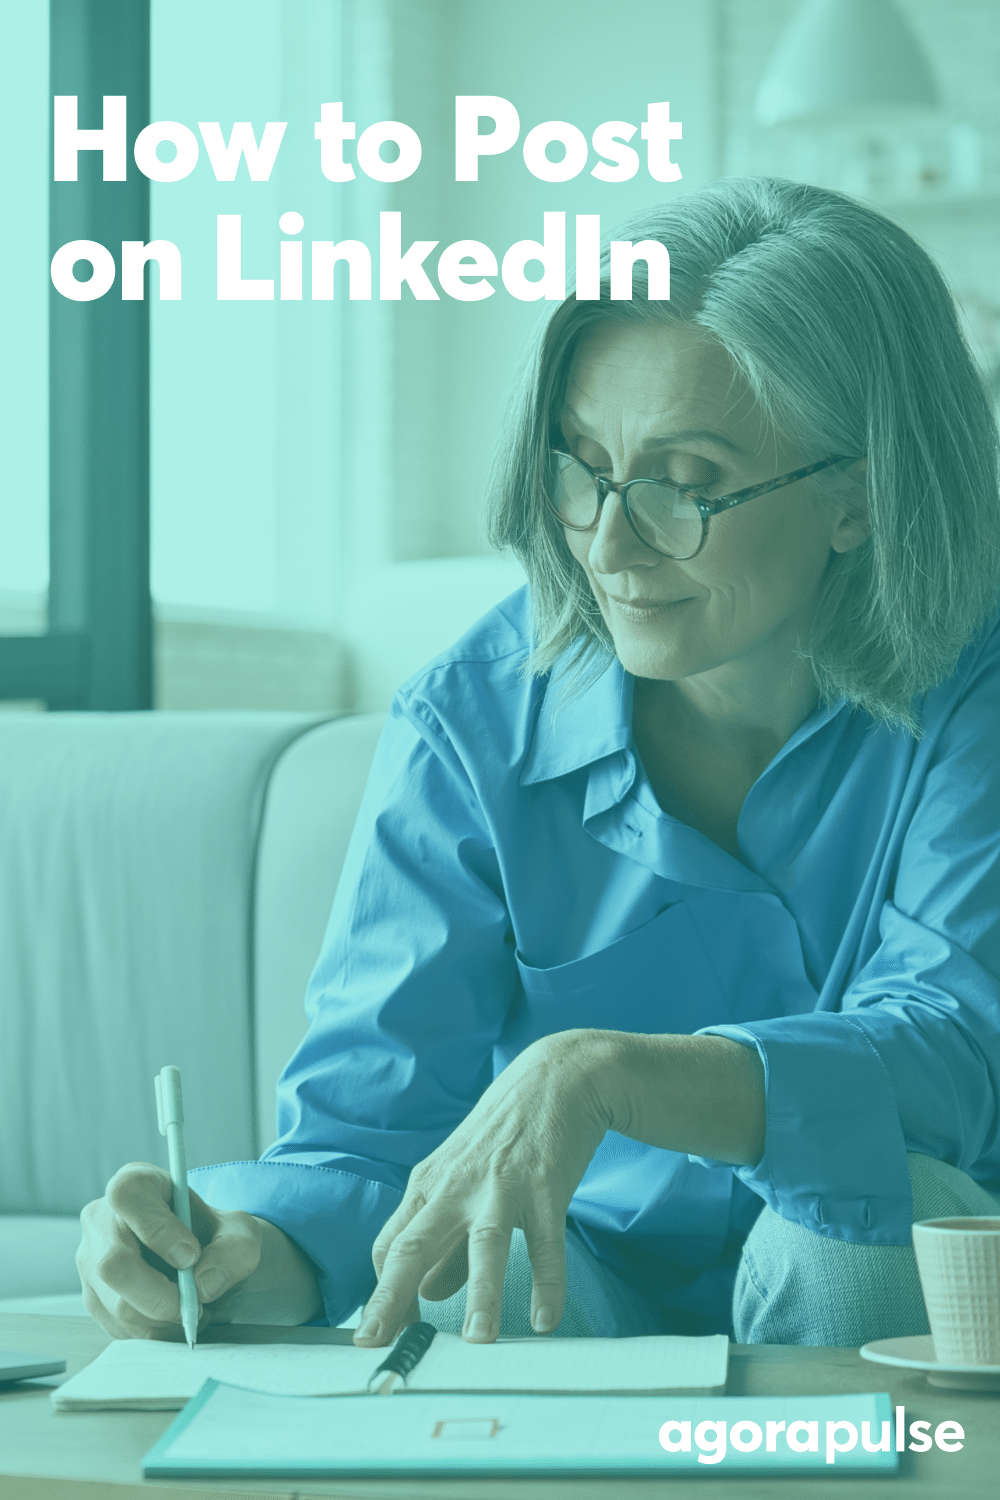 How to Post on LinkedIn